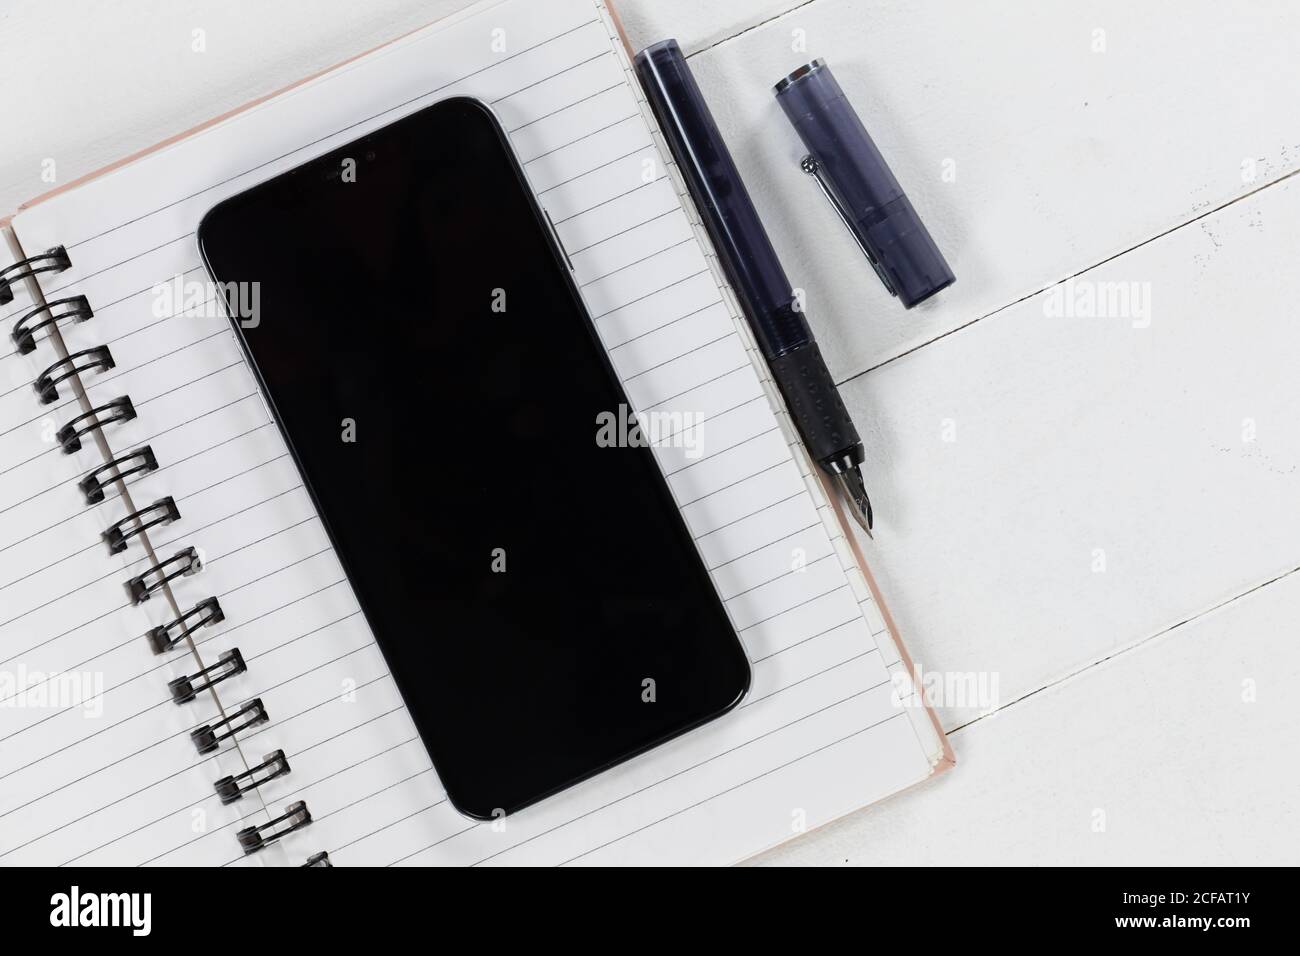 View of a black smartphone, a notebook and a black pen on plain white background Stock Photo